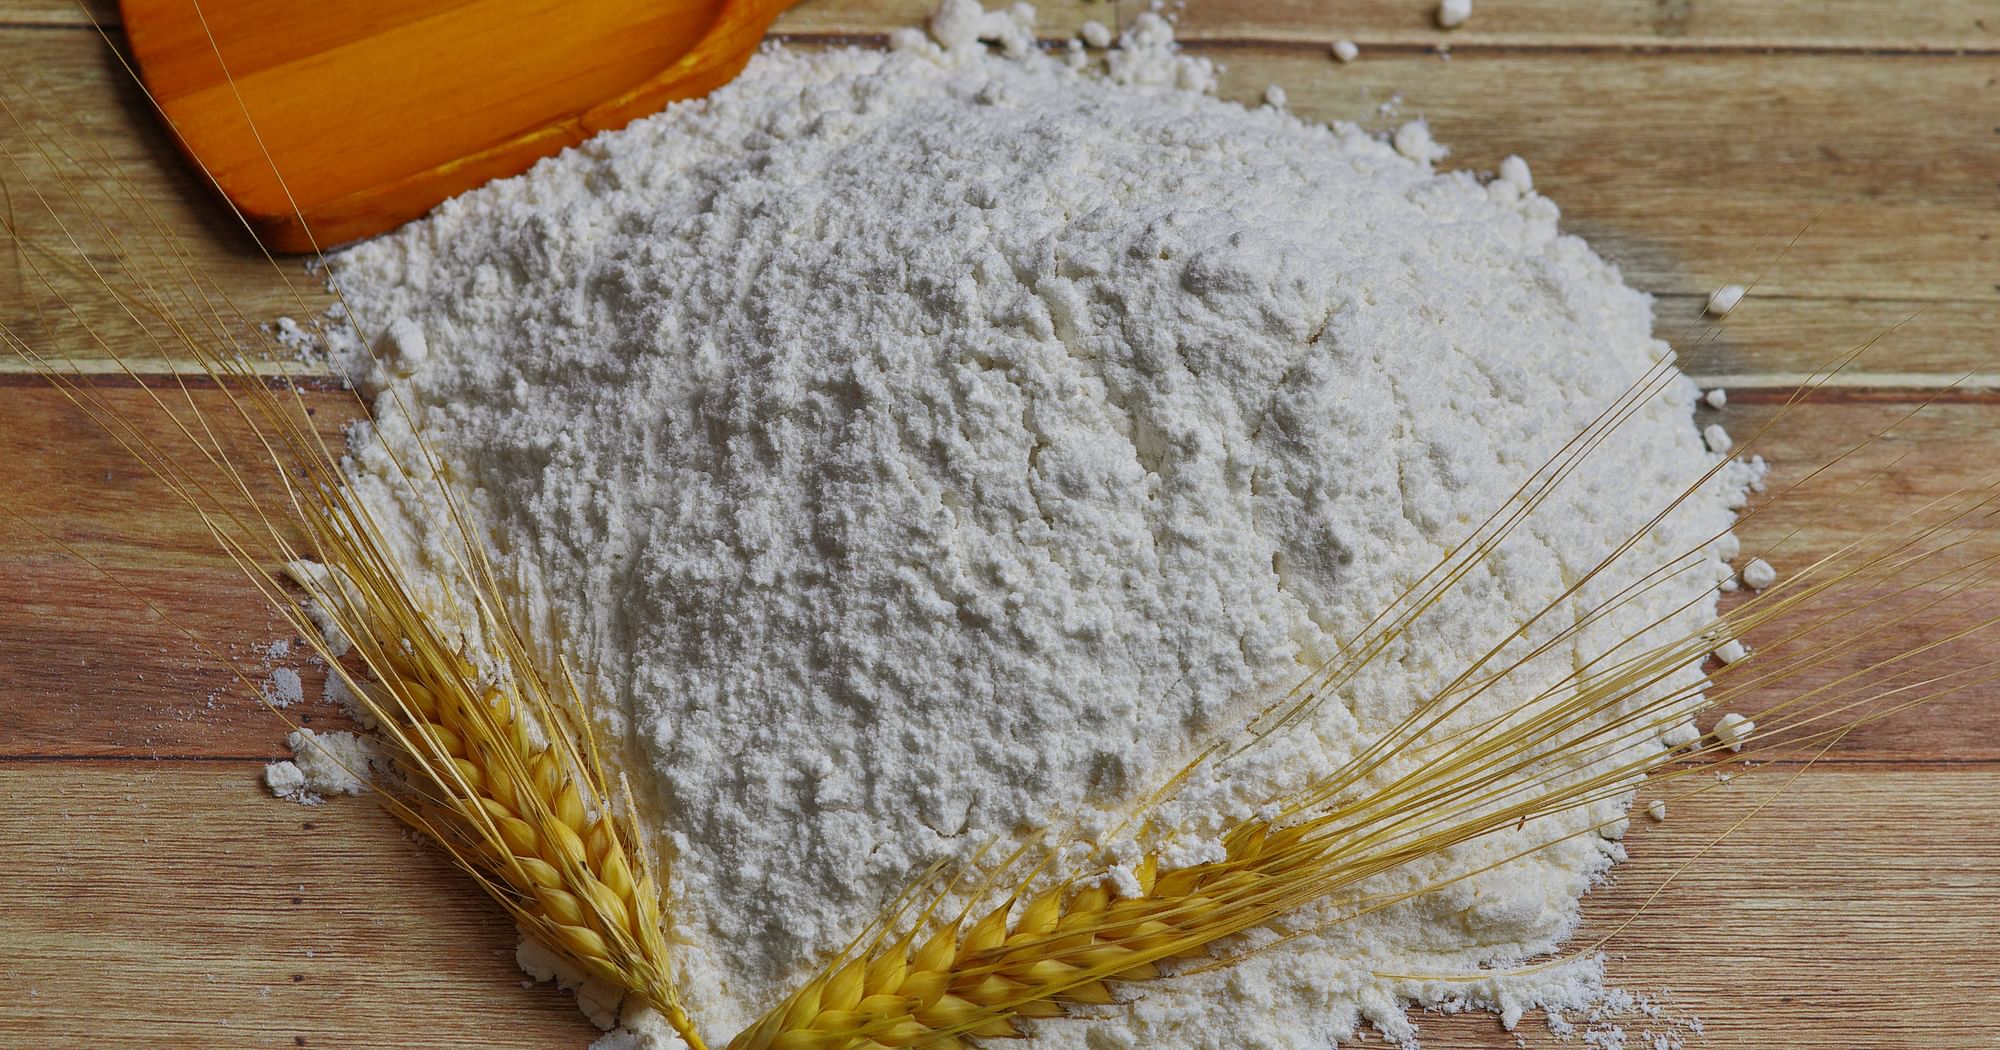 Government Decides To Put Restrictions On Export Of Wheat Flour To Curb Prices